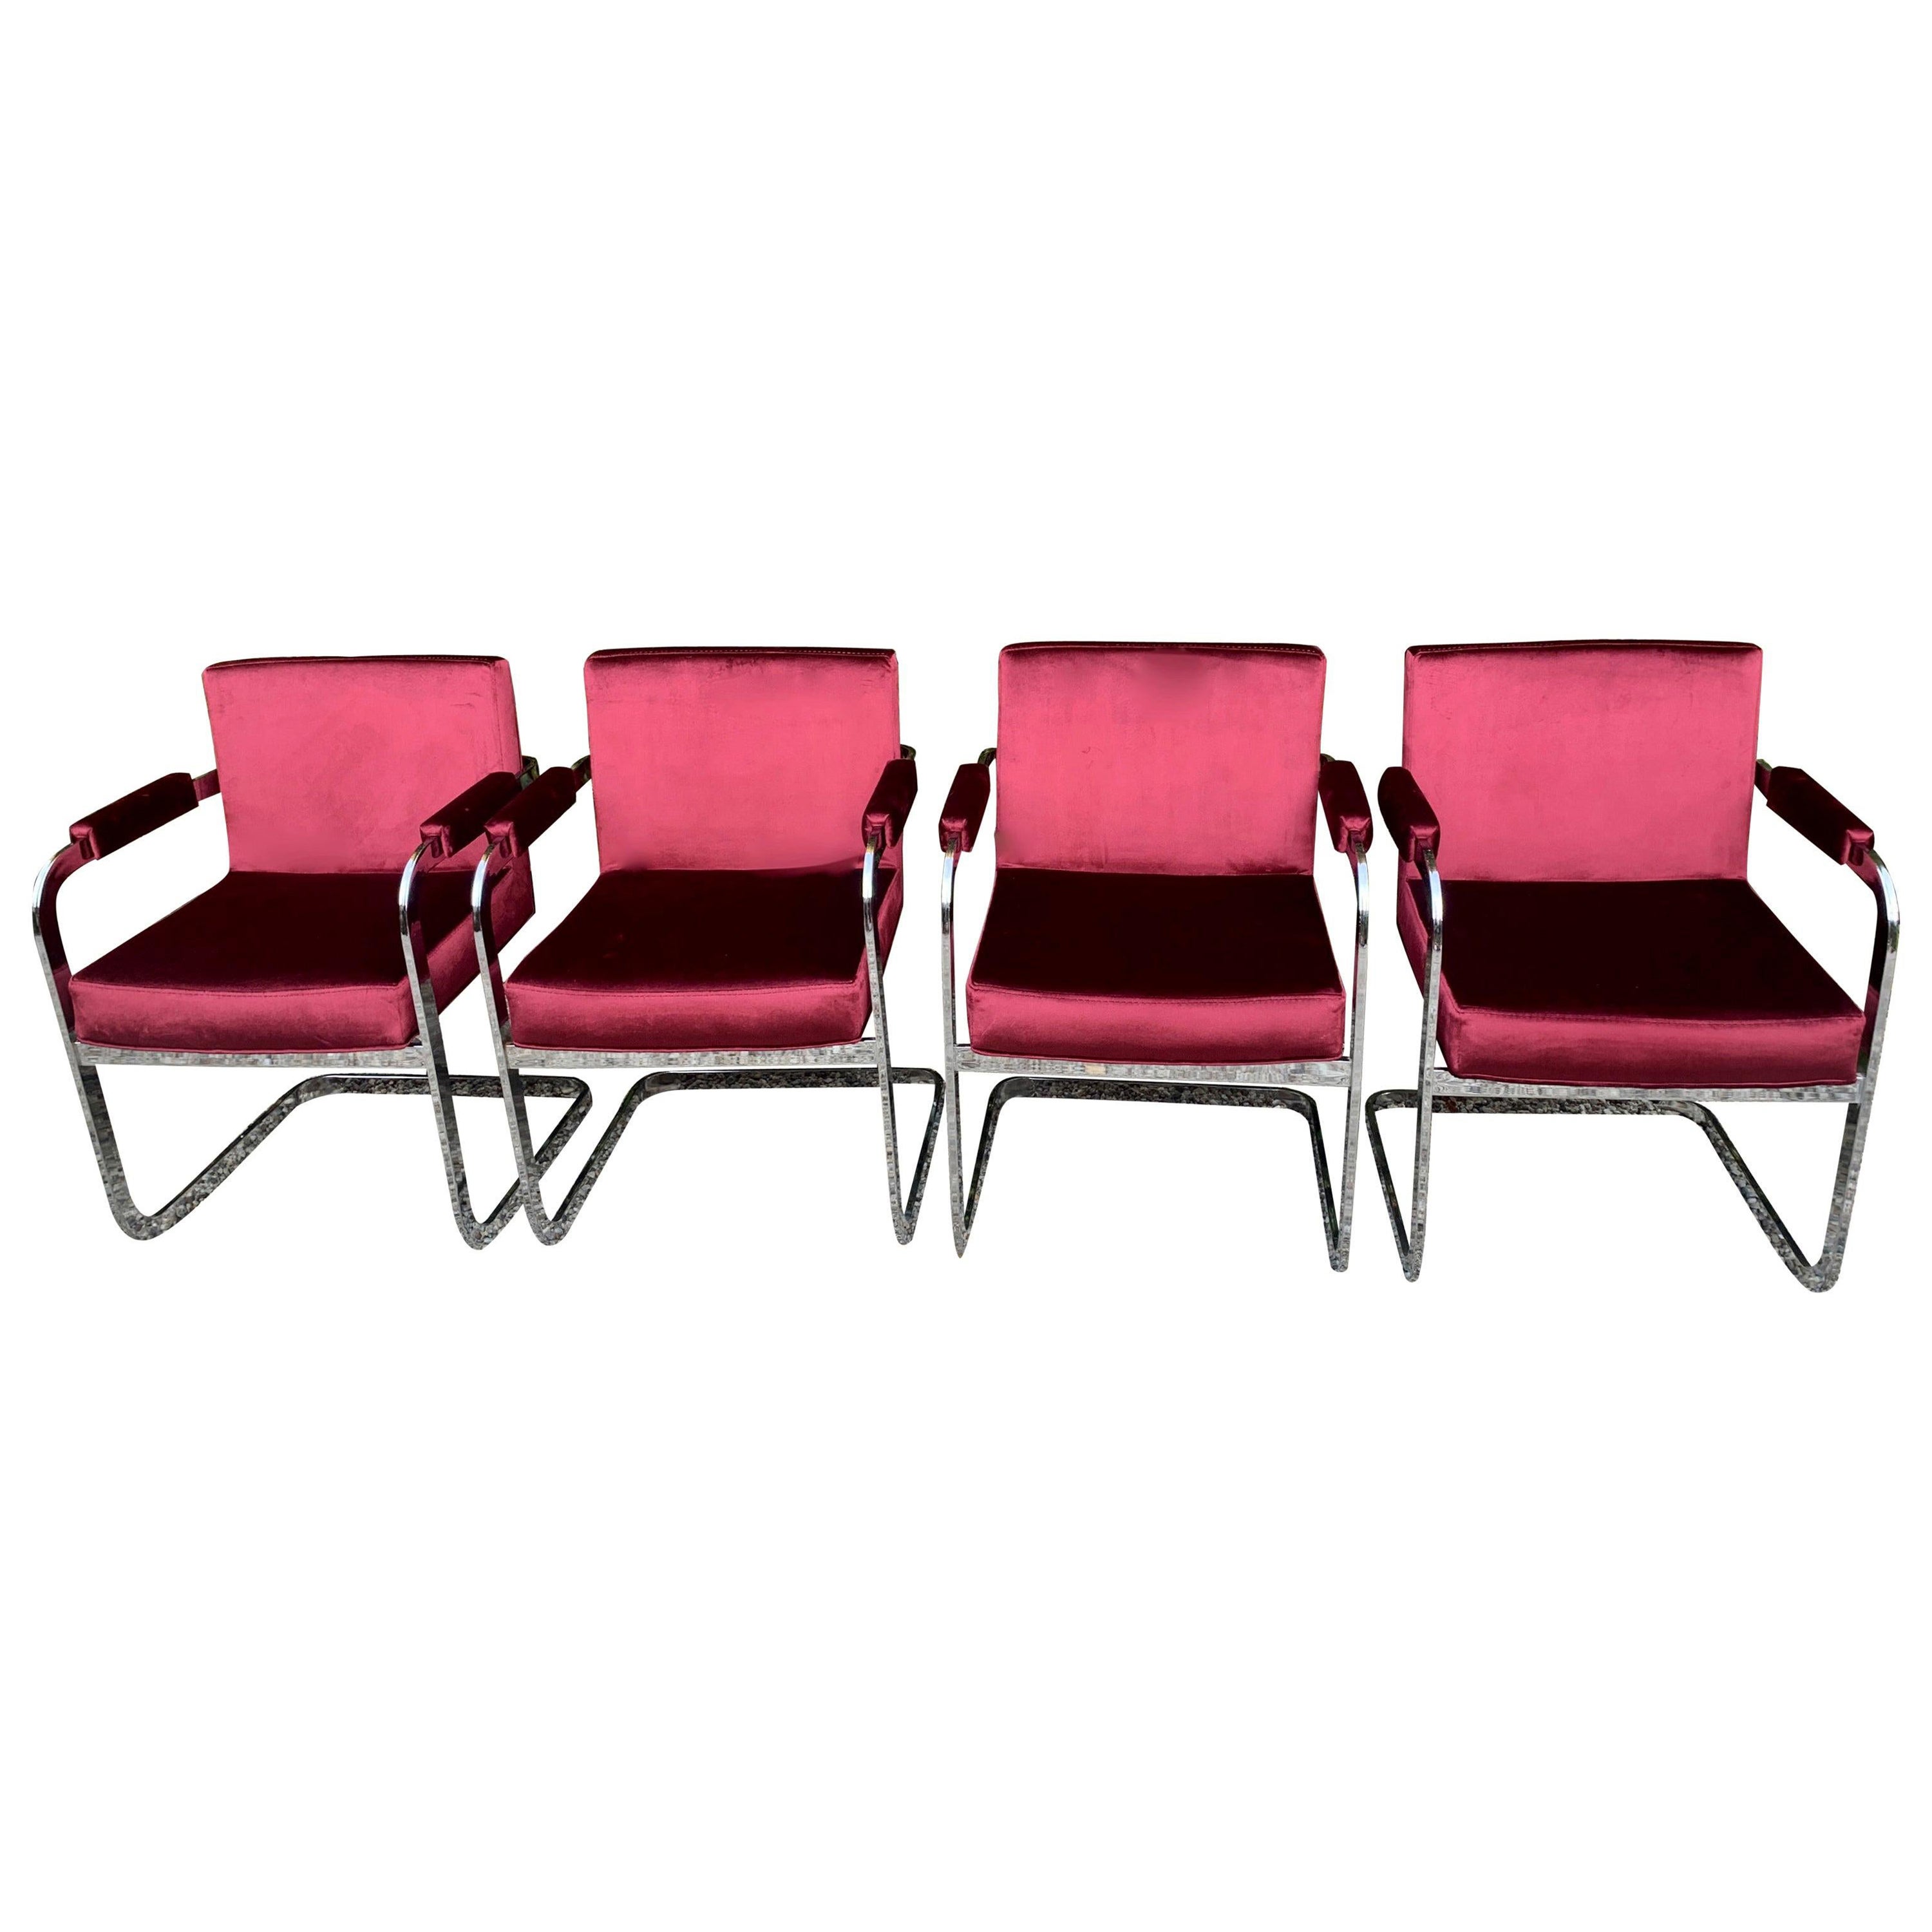 Set of Four Milo Baughman for Thayer Coggin Upholstered Chrome Chairs